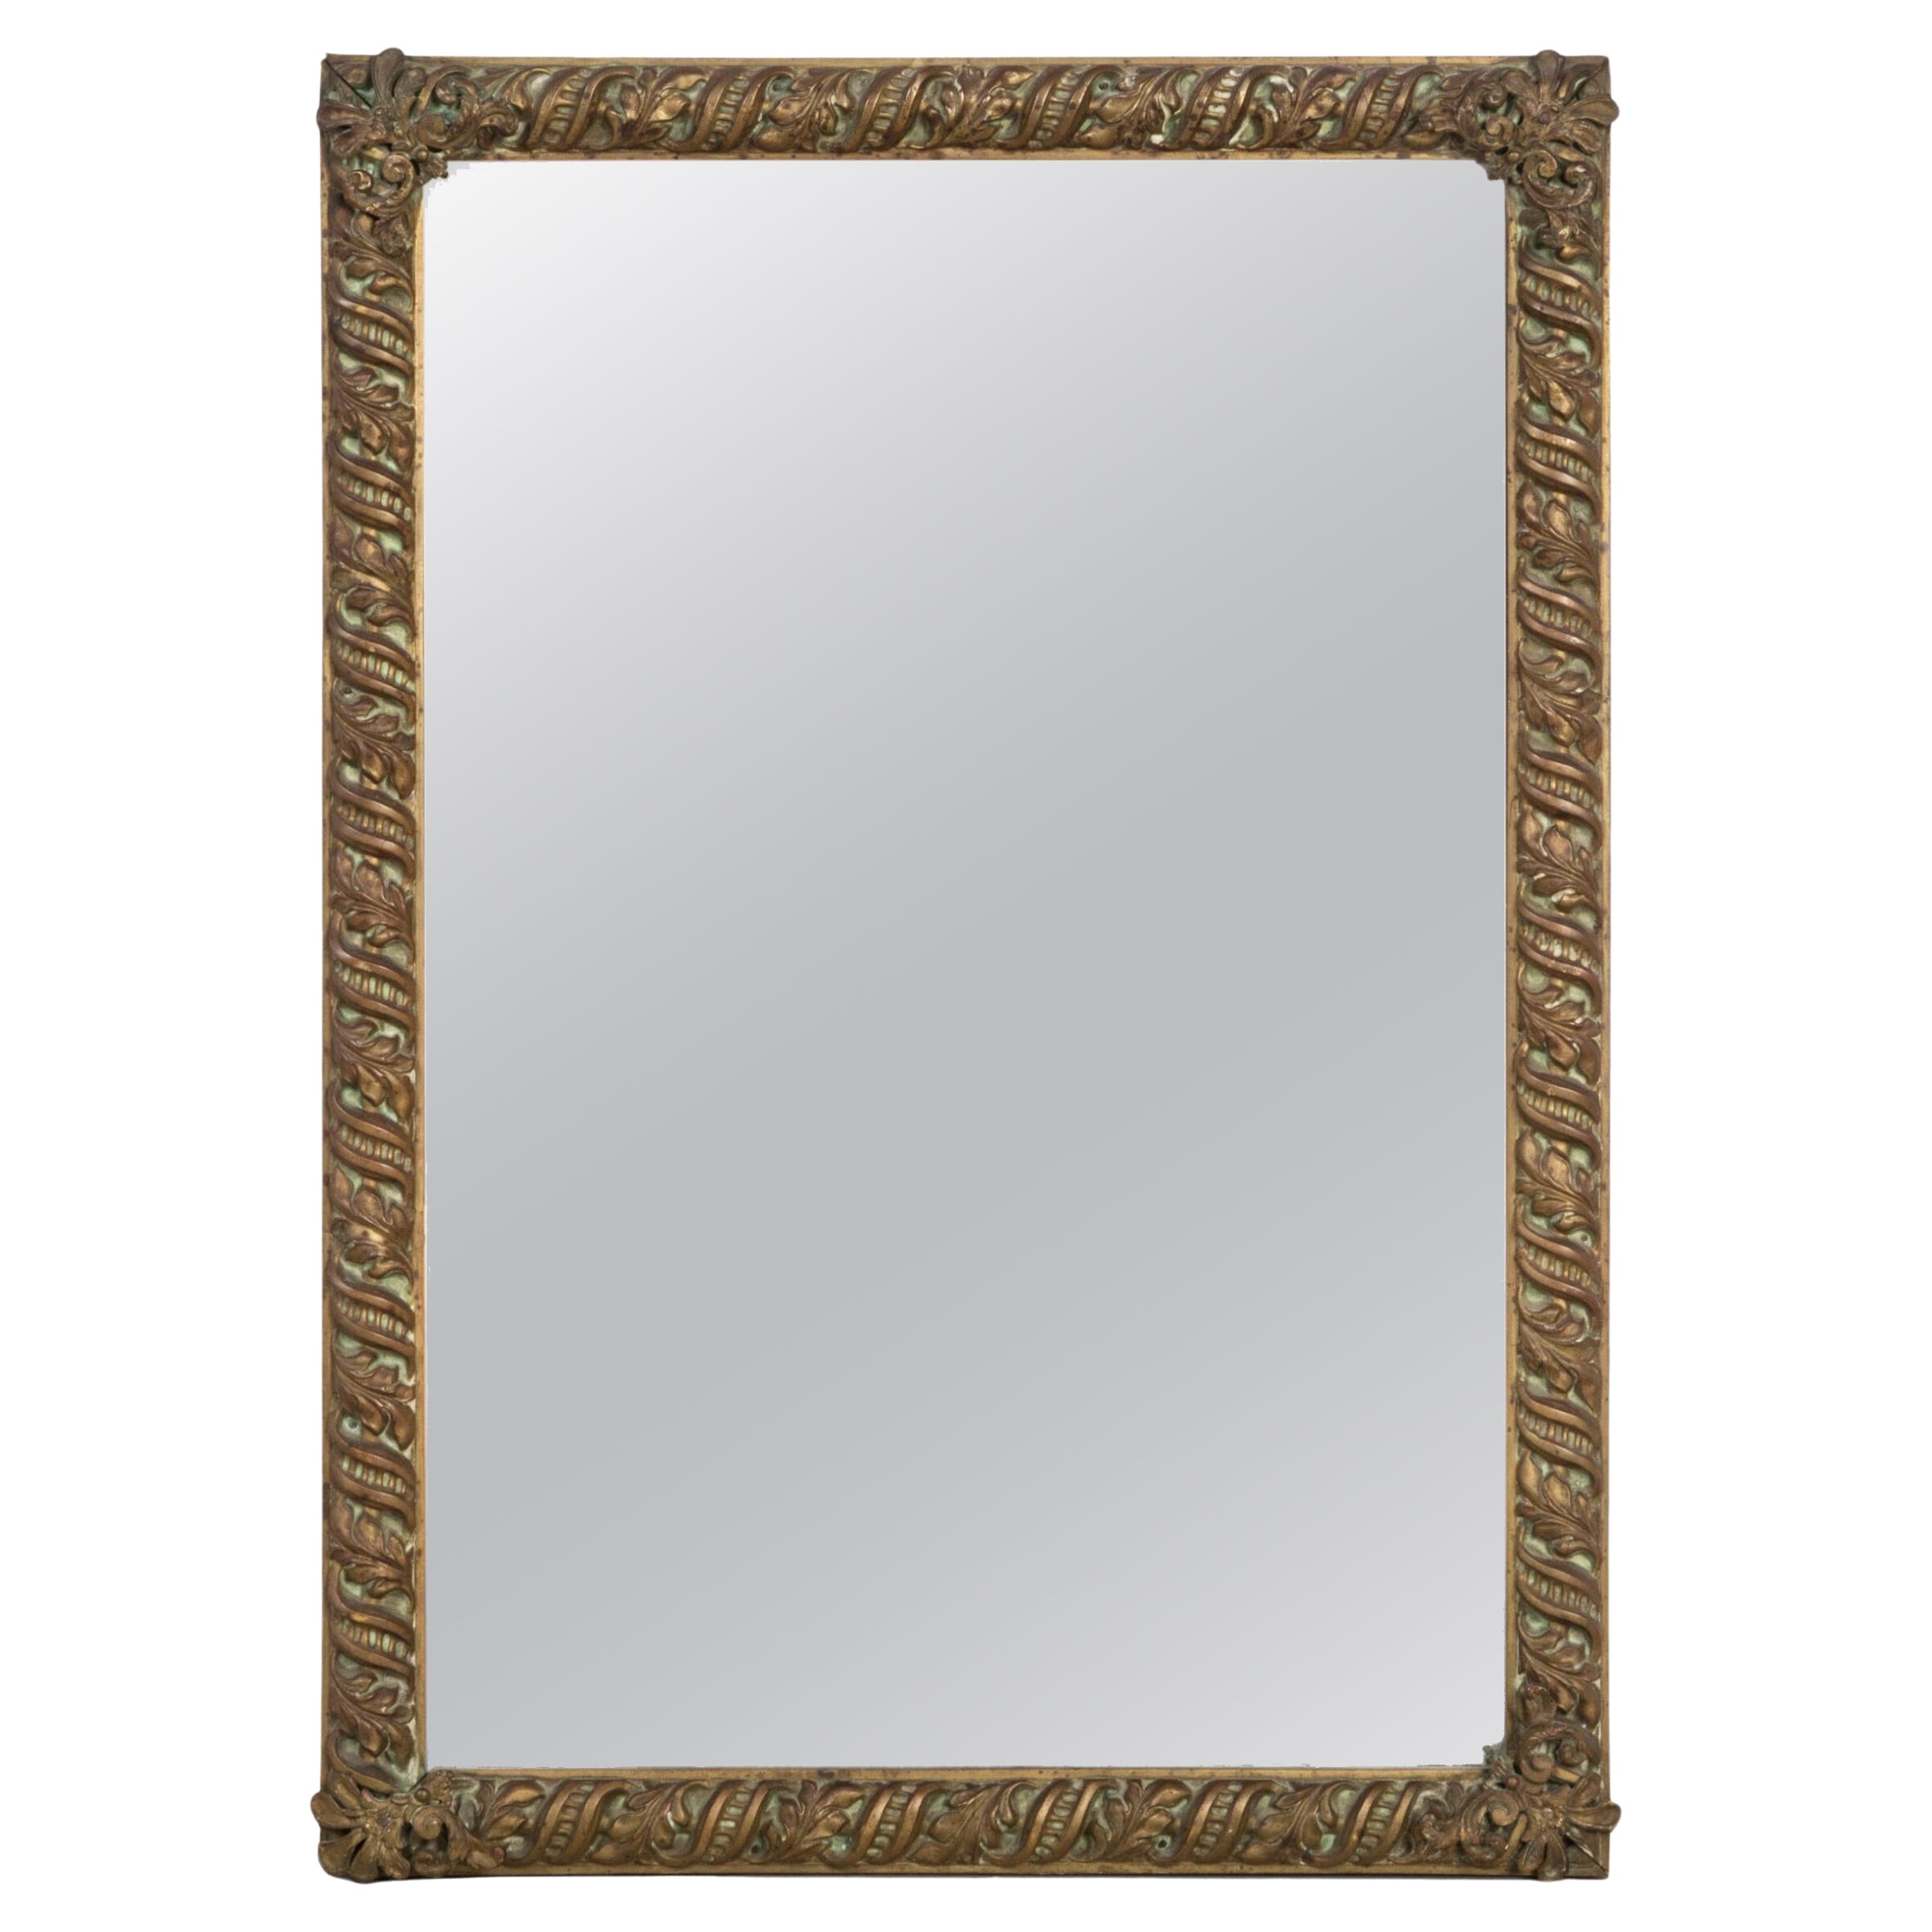 Copper Arts & Crafts Style Rectangular Mirror, Early 20th C For Sale